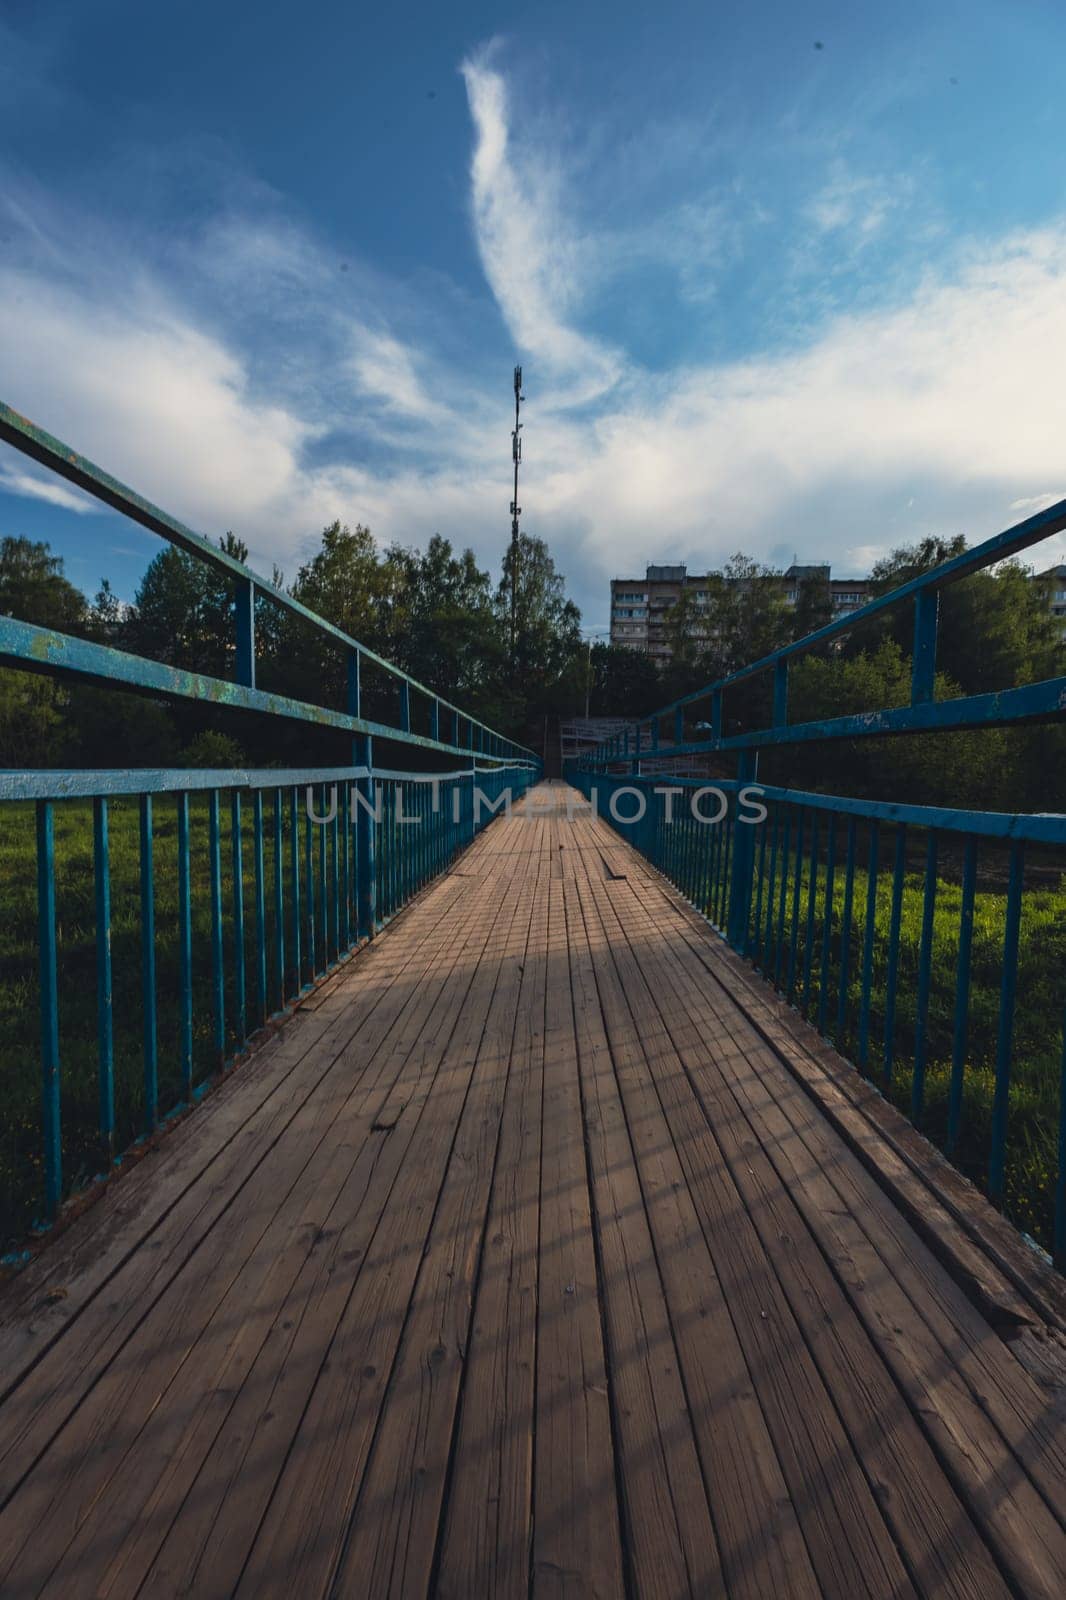 A wooden bridge across the river shot using an ultra-wide angle lens. High quality photo